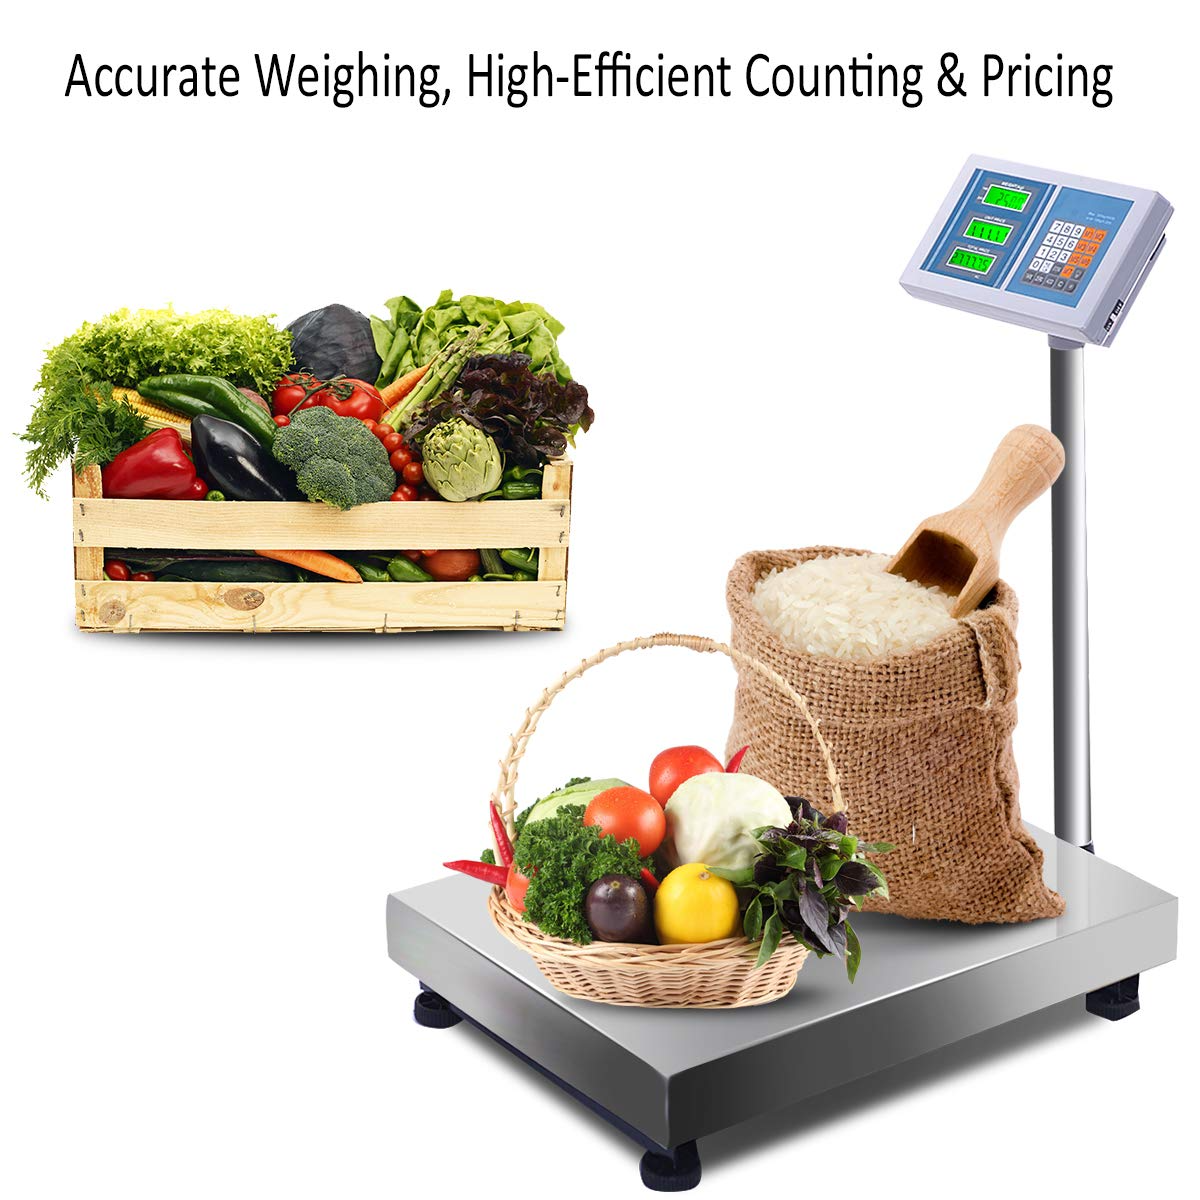 postage scales that calculate postage